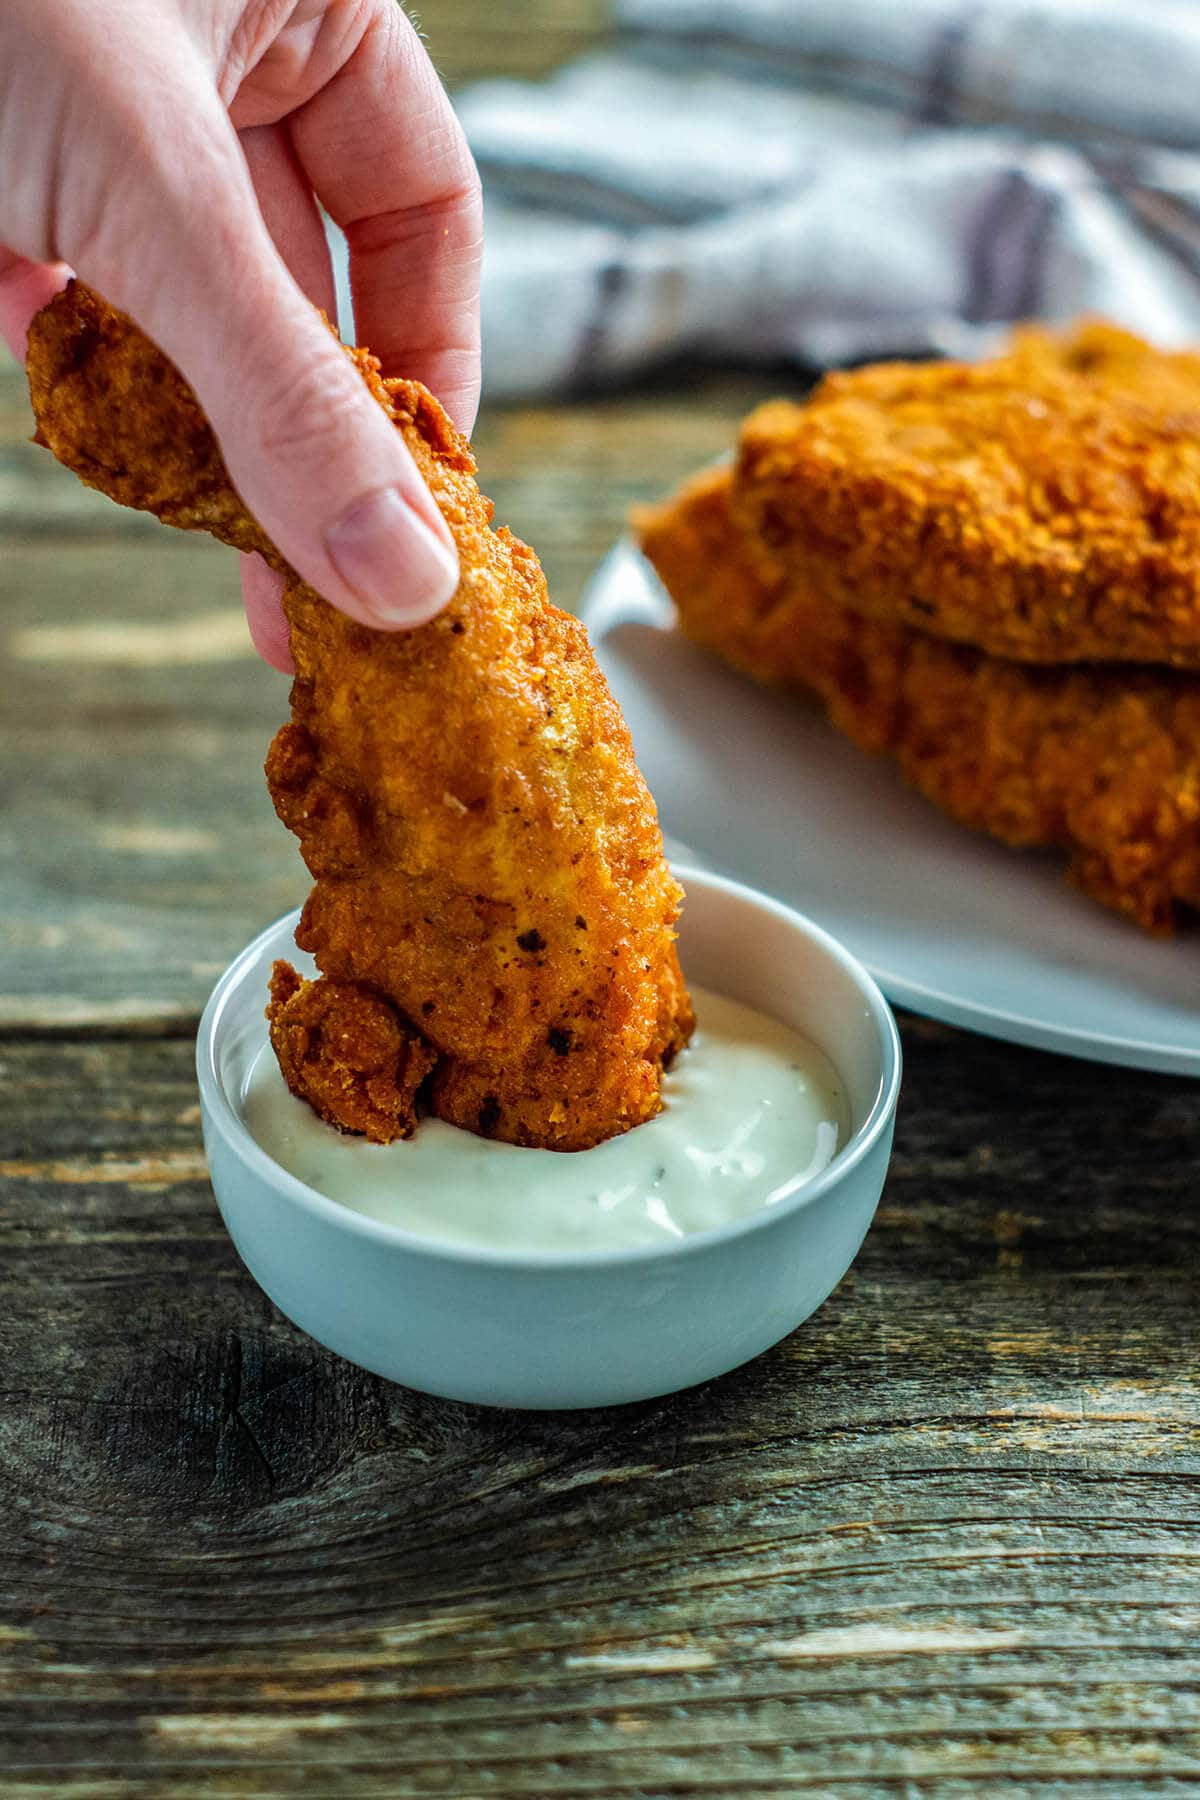 Fried chicken tender dipped into ranch sauce.